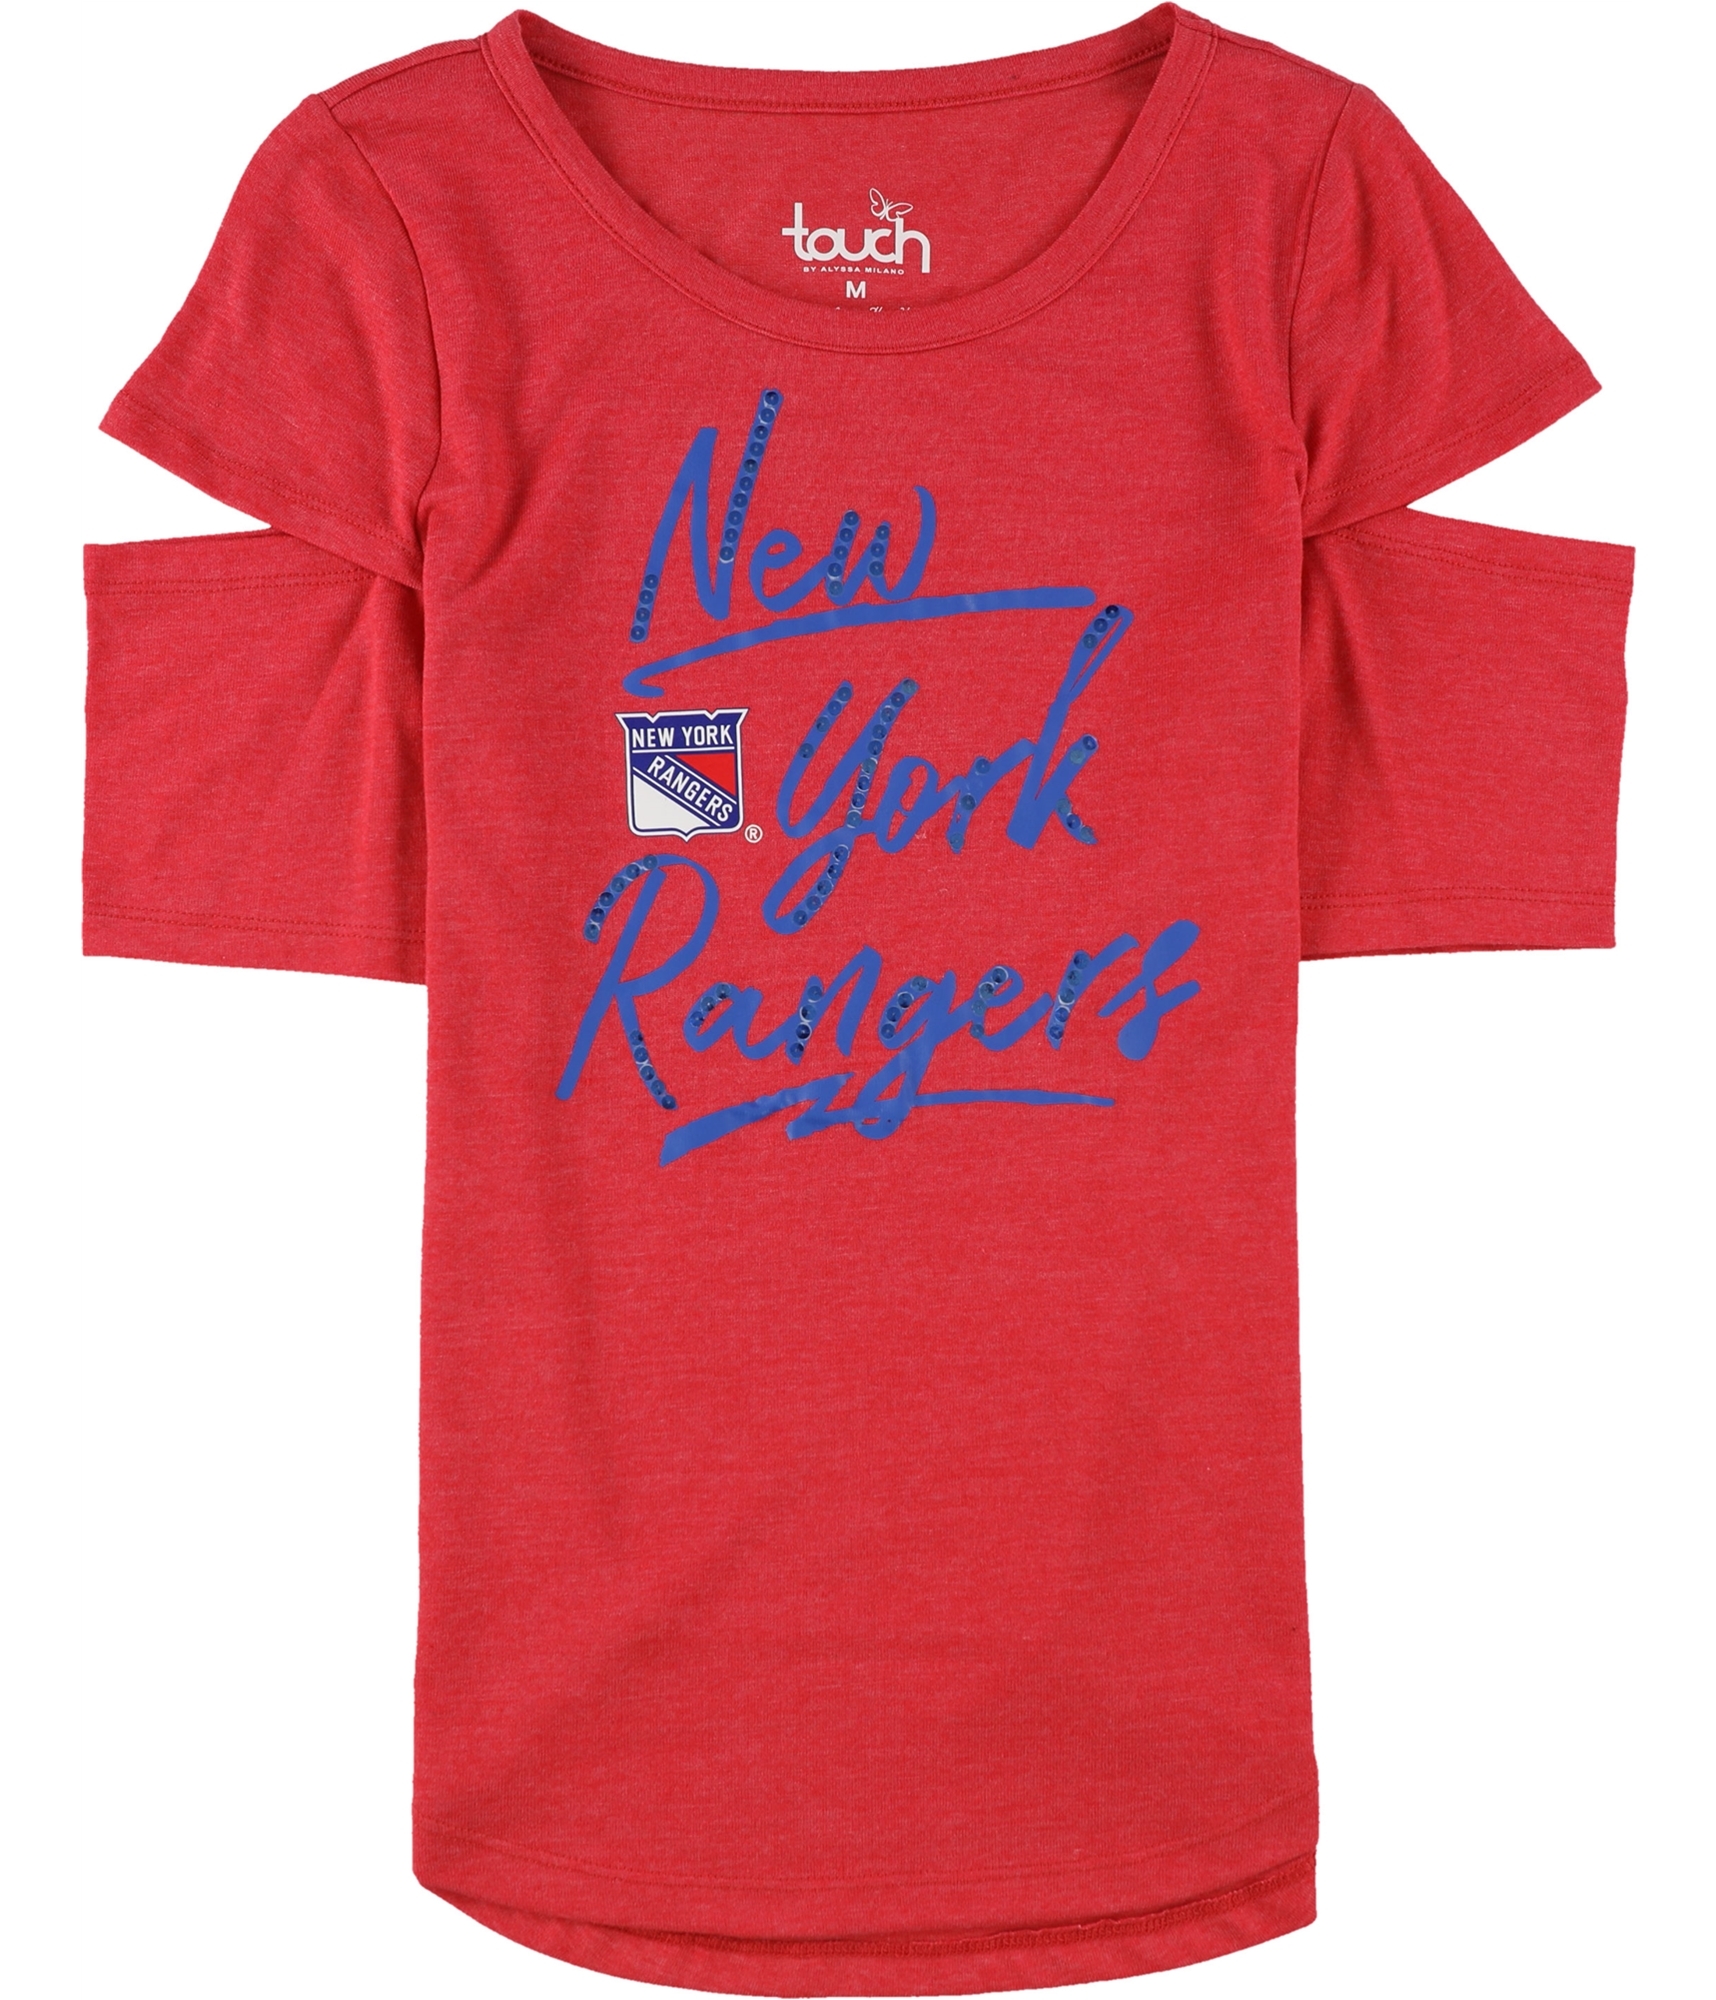 Touch Womens New York Rangers Tank Top, TW2